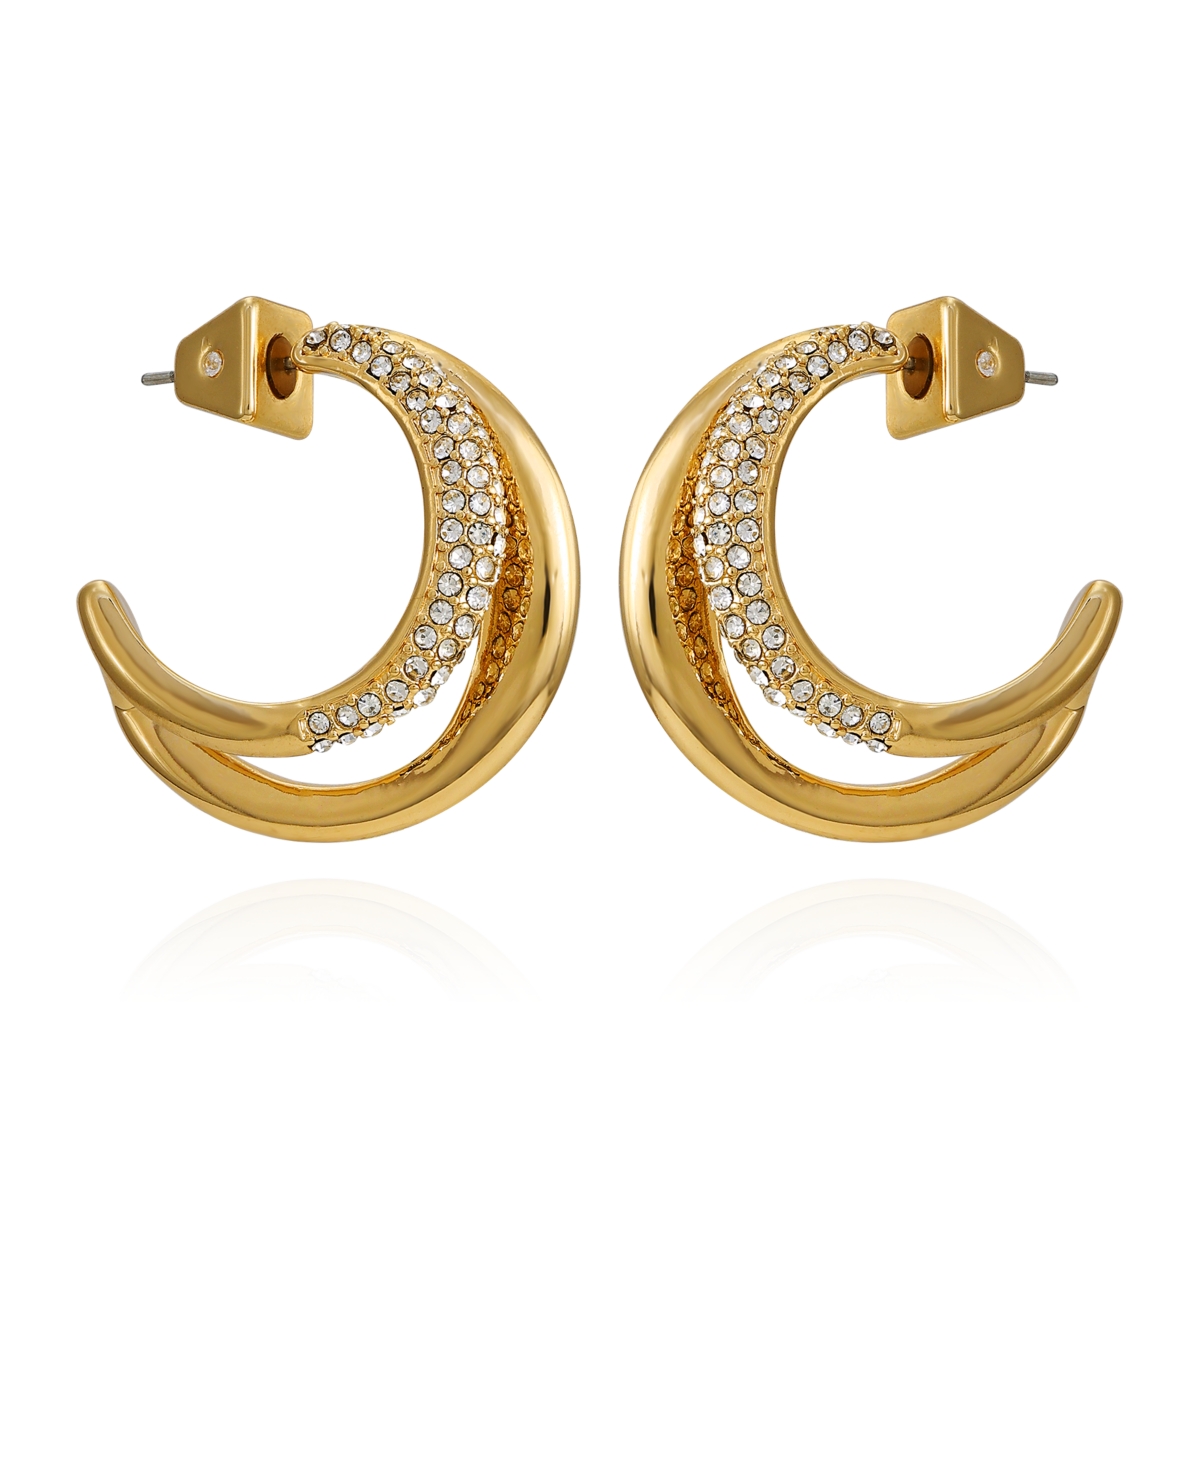 Vince Camuto Gold-tone Glass Stone Open Hoop Earrings